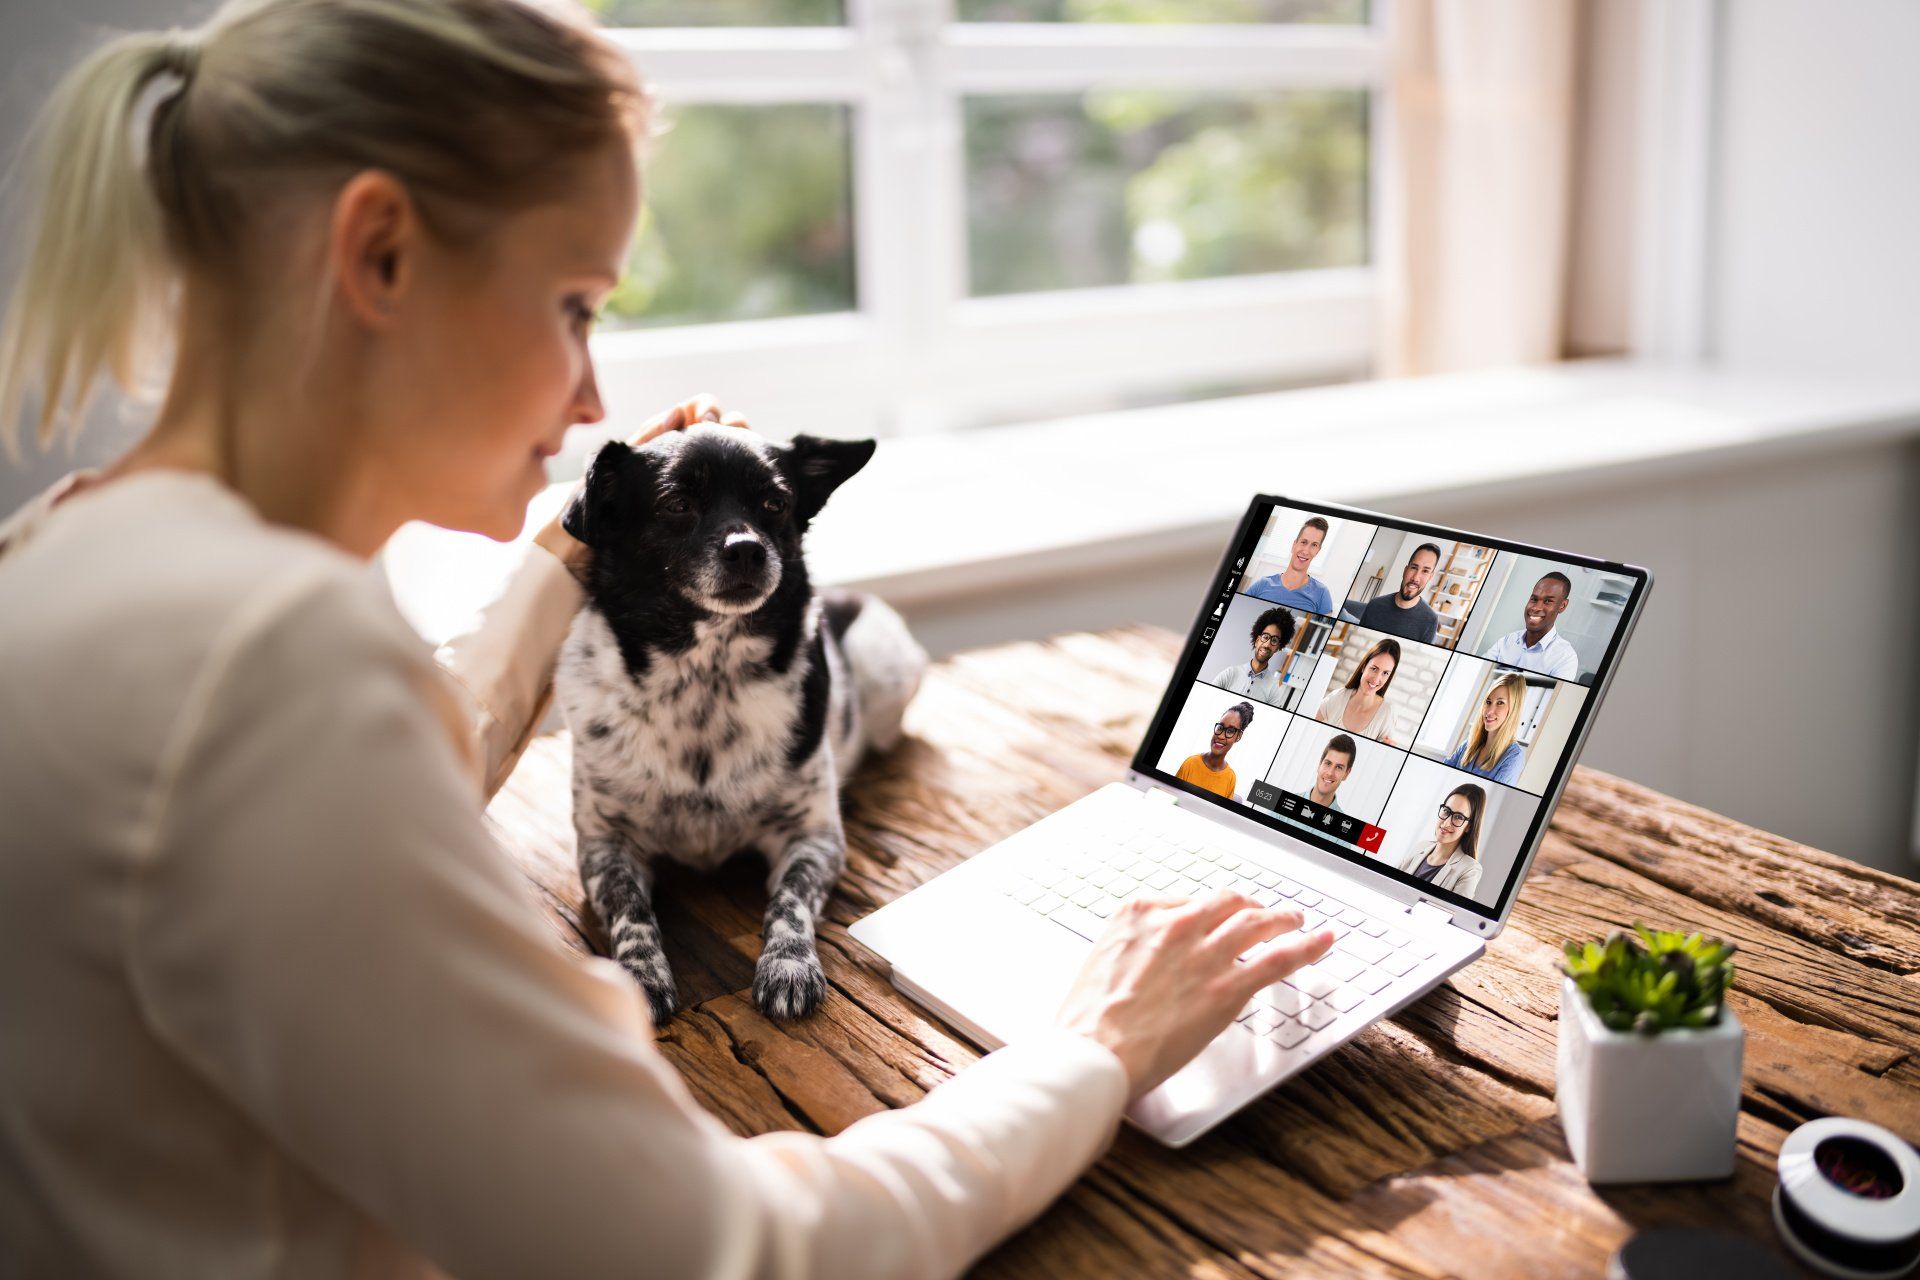 A woman accompanied by her dog sitting in front of her laptop which displays a video conference